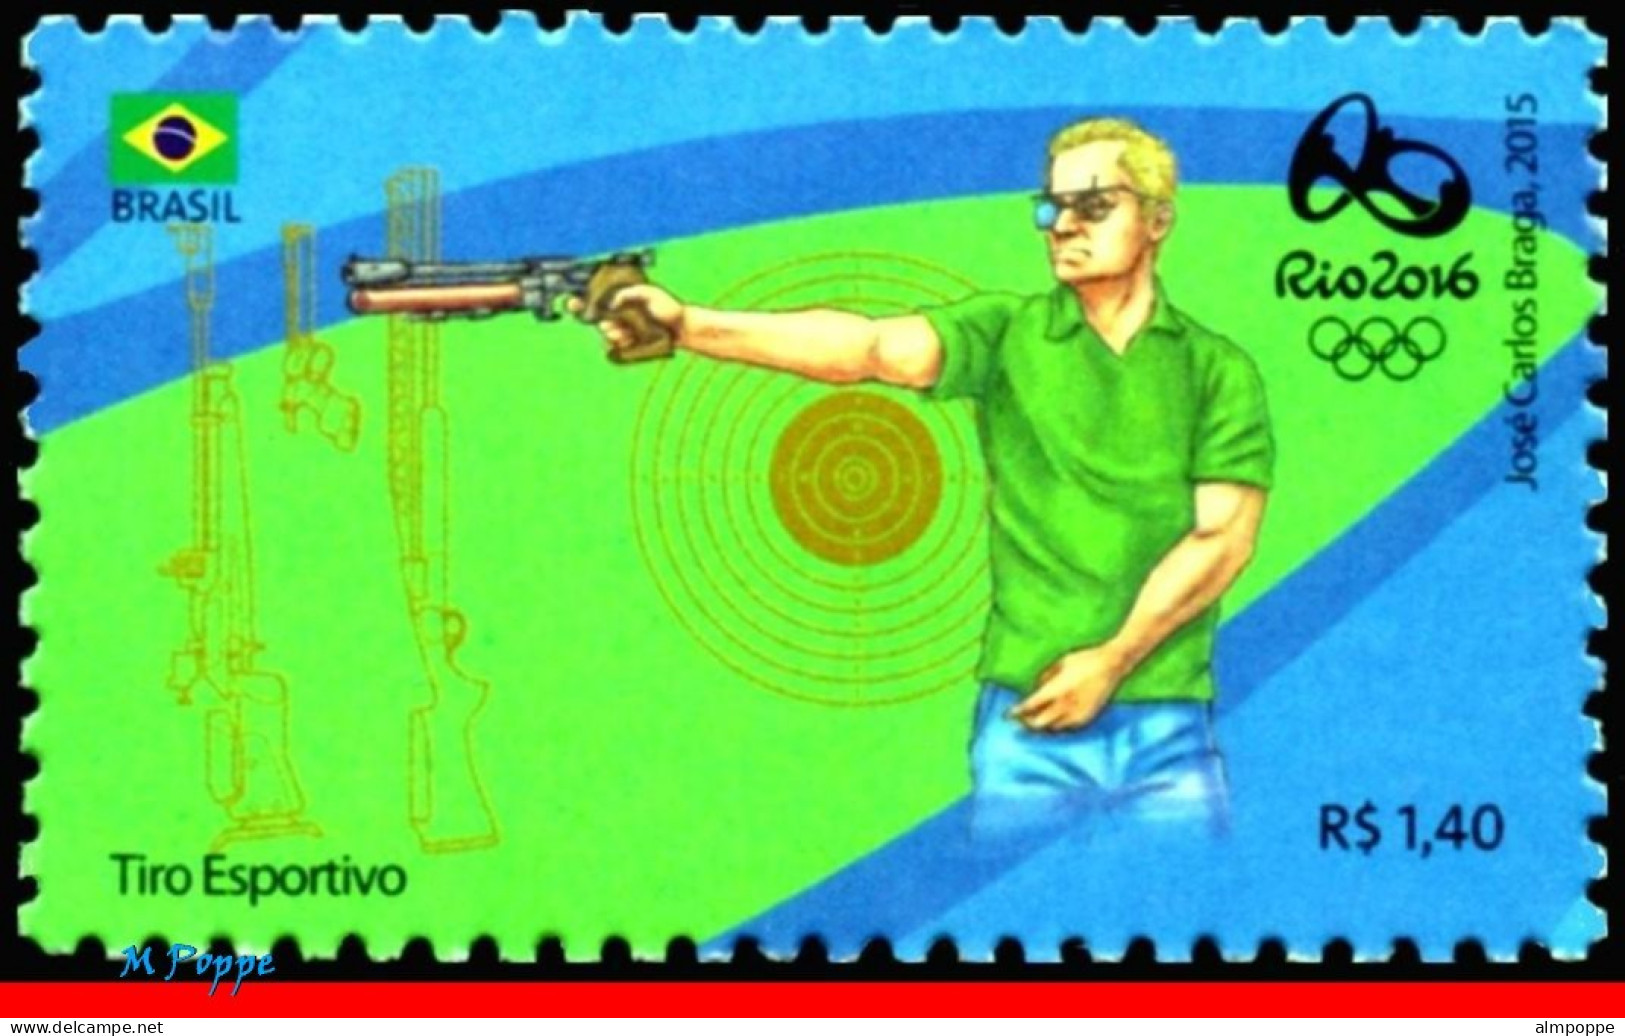 Ref. BR-3318S BRAZIL 2015 - OLYMPIC GAMES, RIO 2016,SHOOTING,WEAPONS,STAMP OF 4TH SHEET, MNH, SPORTS 1V Sc# 3318S - Shooting (Weapons)